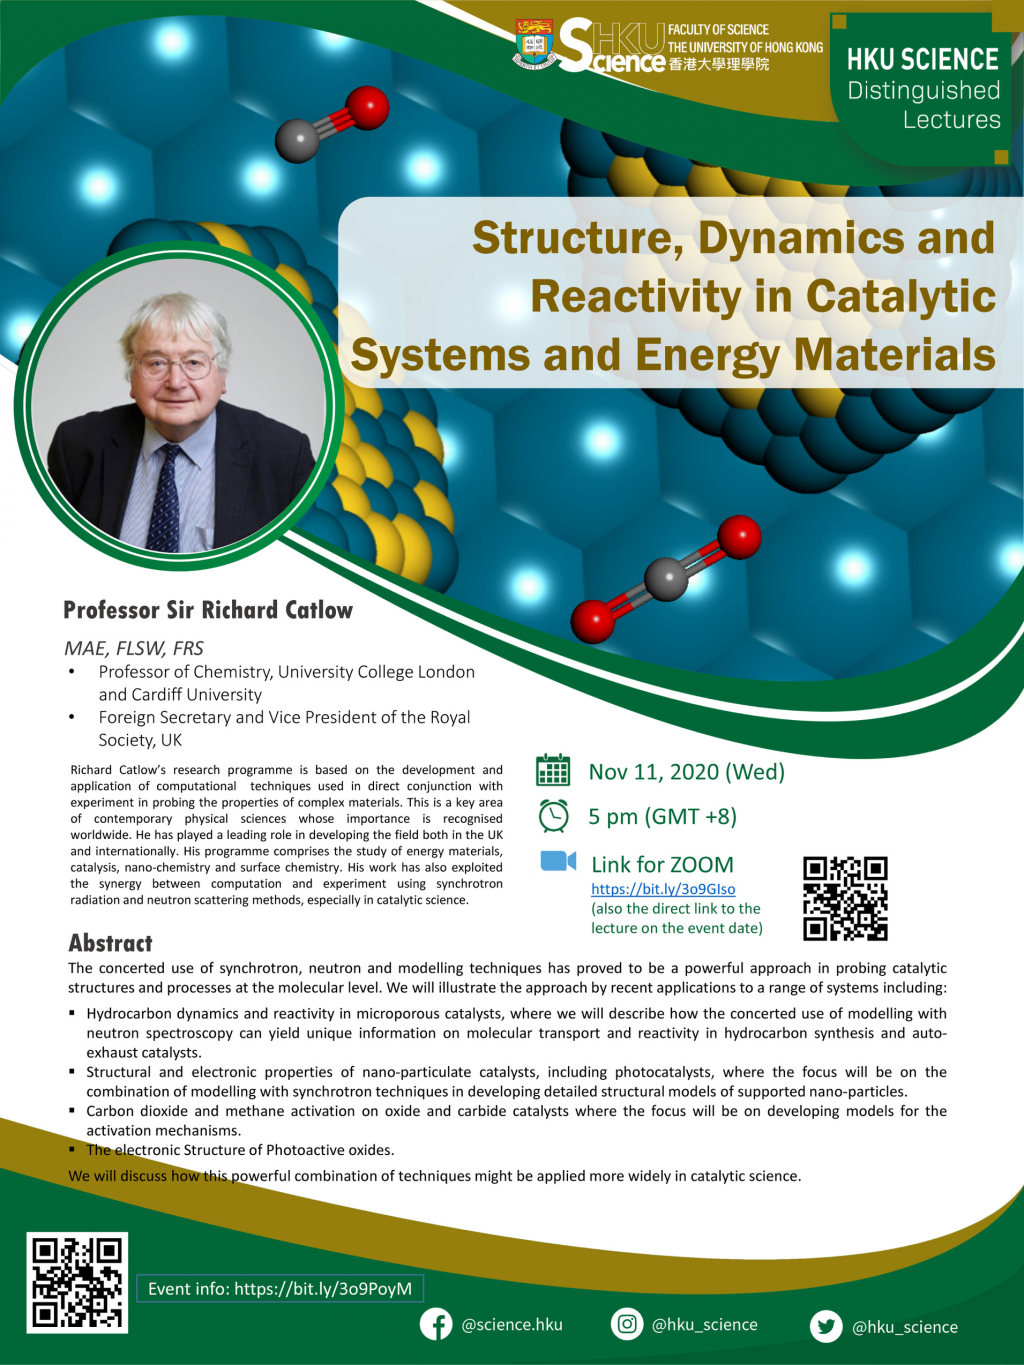 HKU Science Distinguished Lecture - Structure, Dynamics and Reactivity in Catalytic Systems and Energy Materials